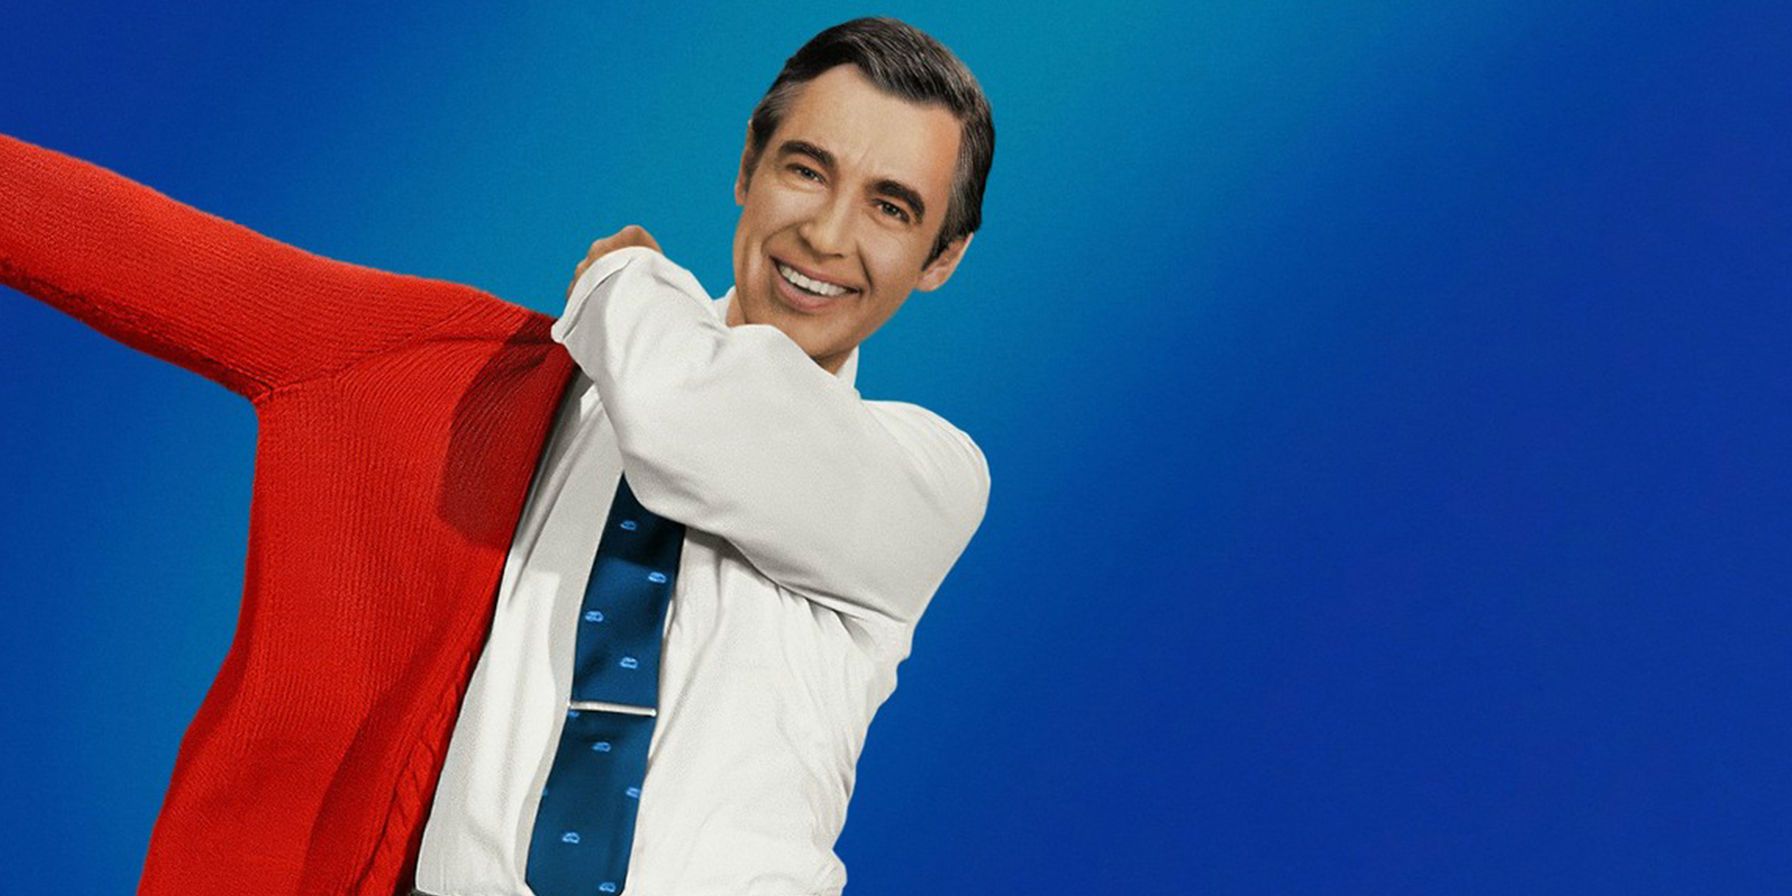 Fred Rogers in Won't You Be My Neighbor?